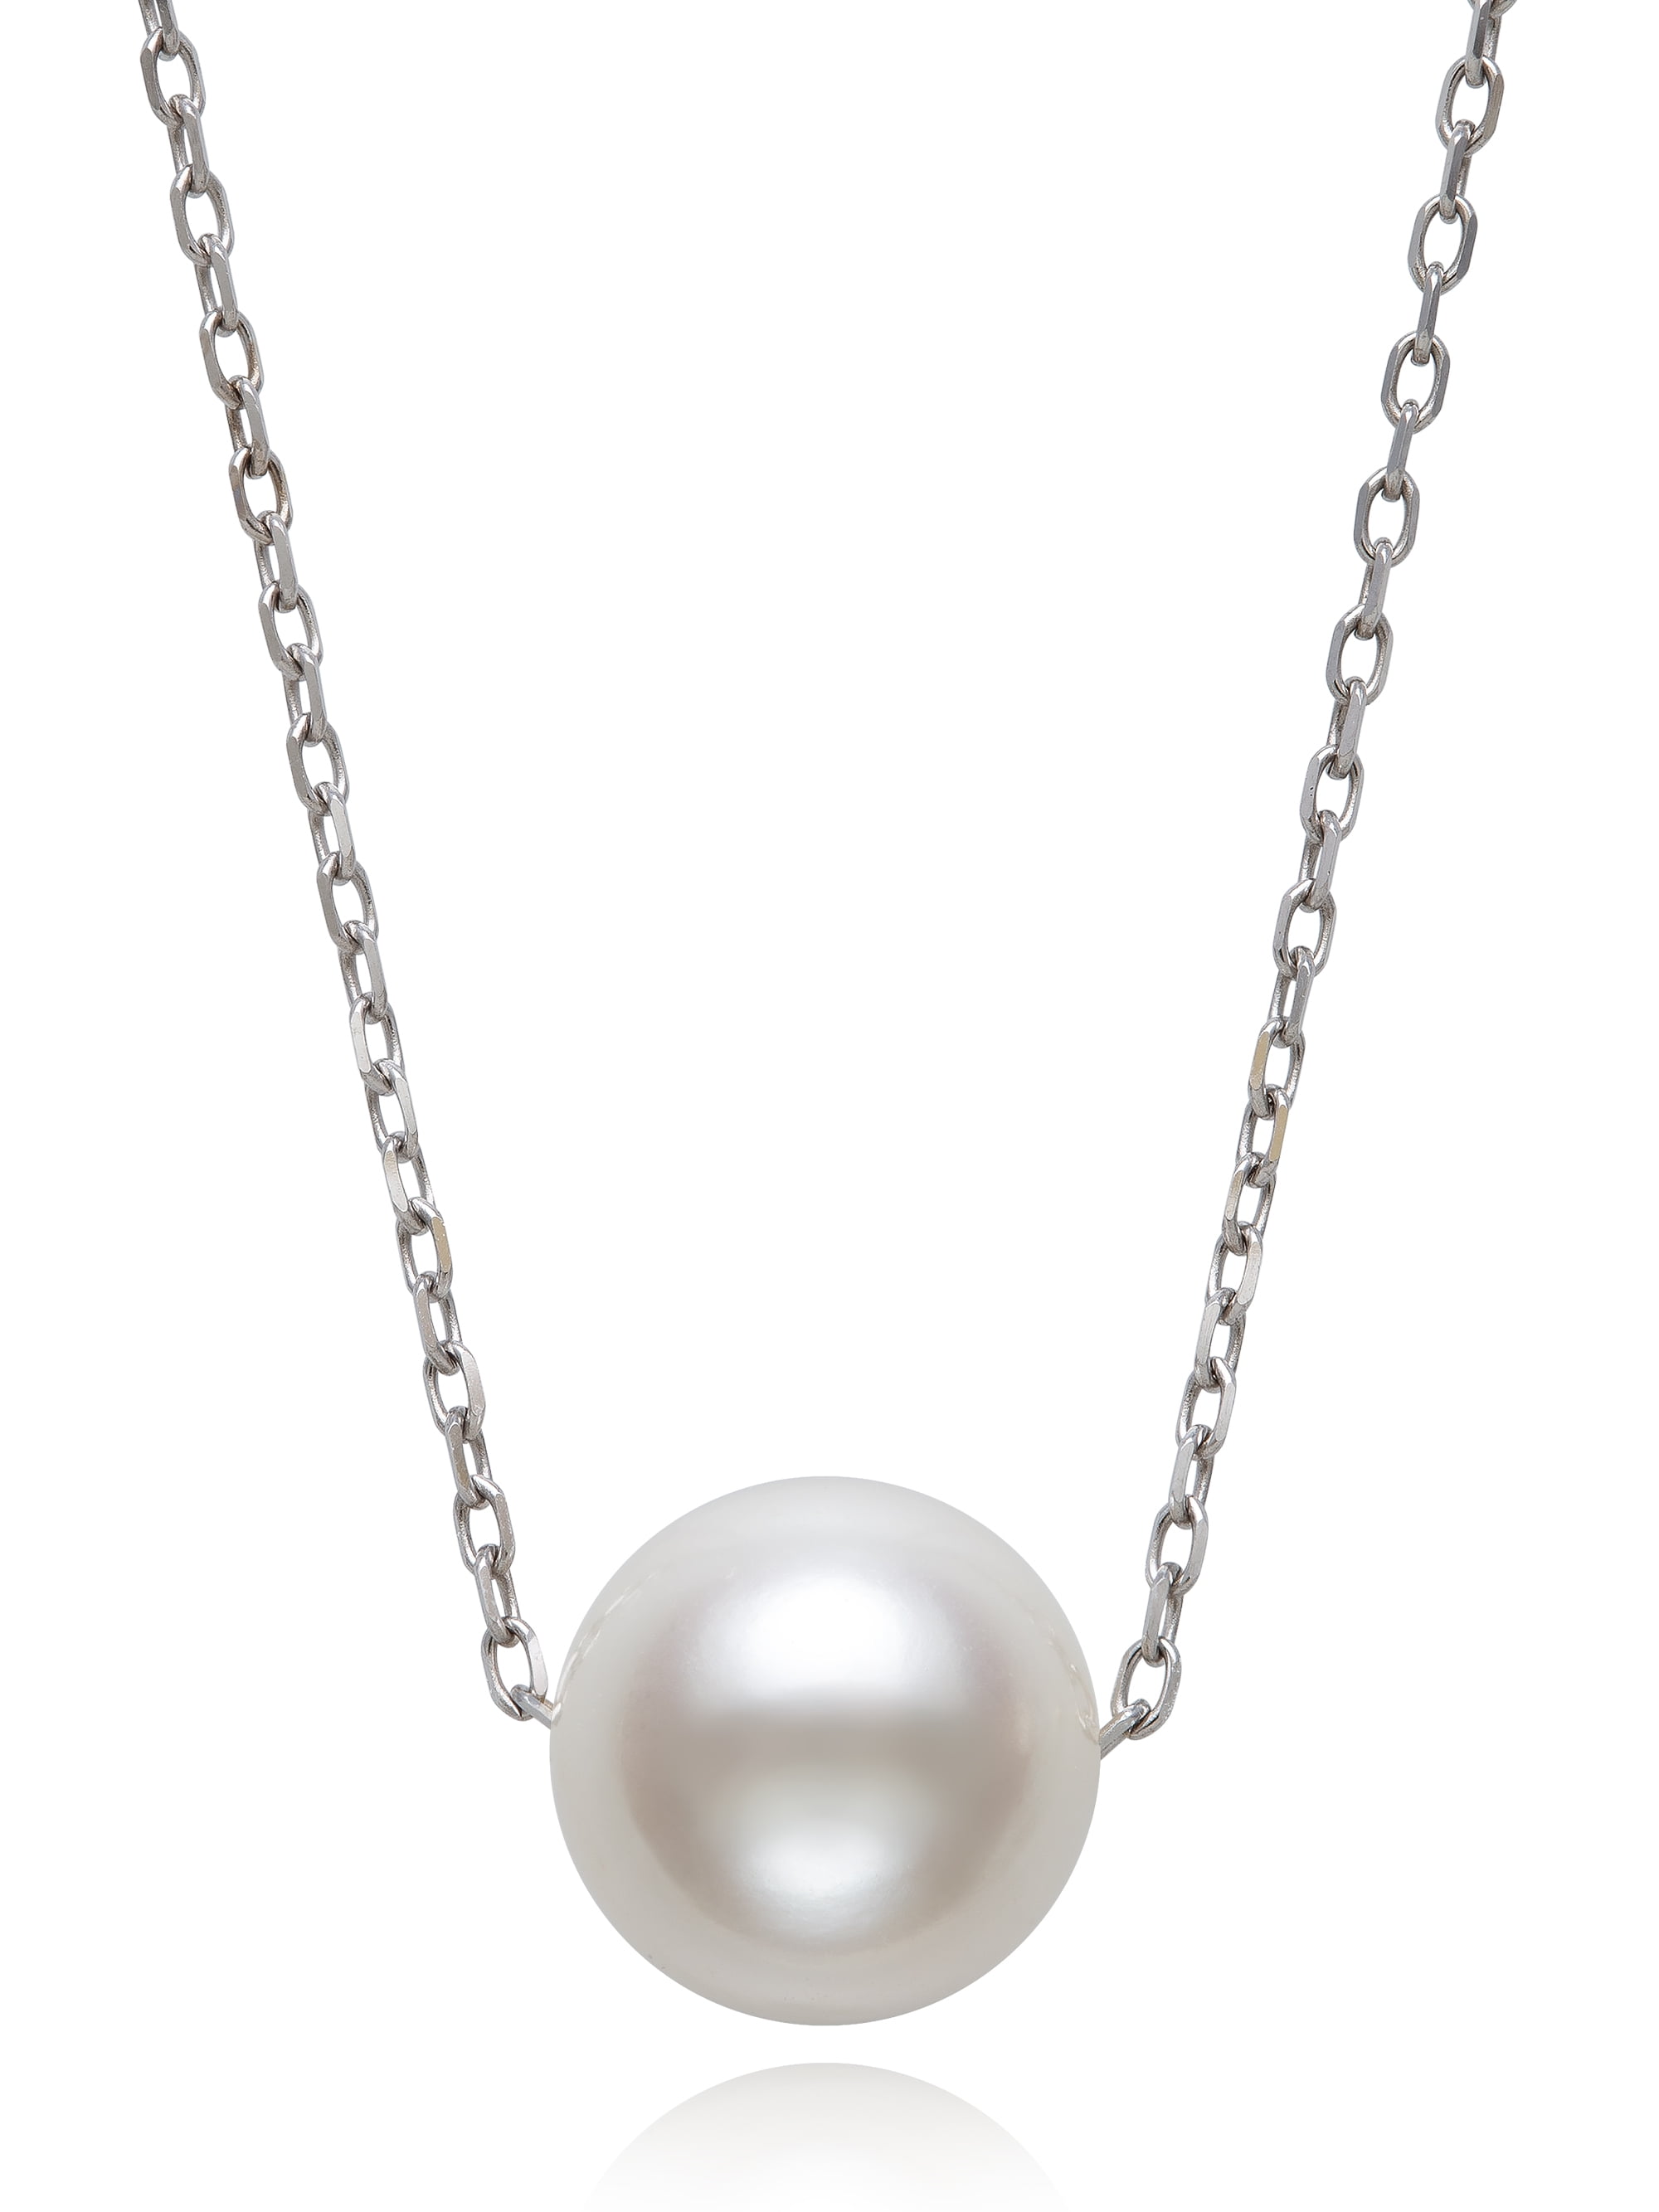 Buy Single Small White Pearl Gold Floating Pearl Necklace, Floating Pearl  Necklace, One Pearl Necklace Online in India - Etsy